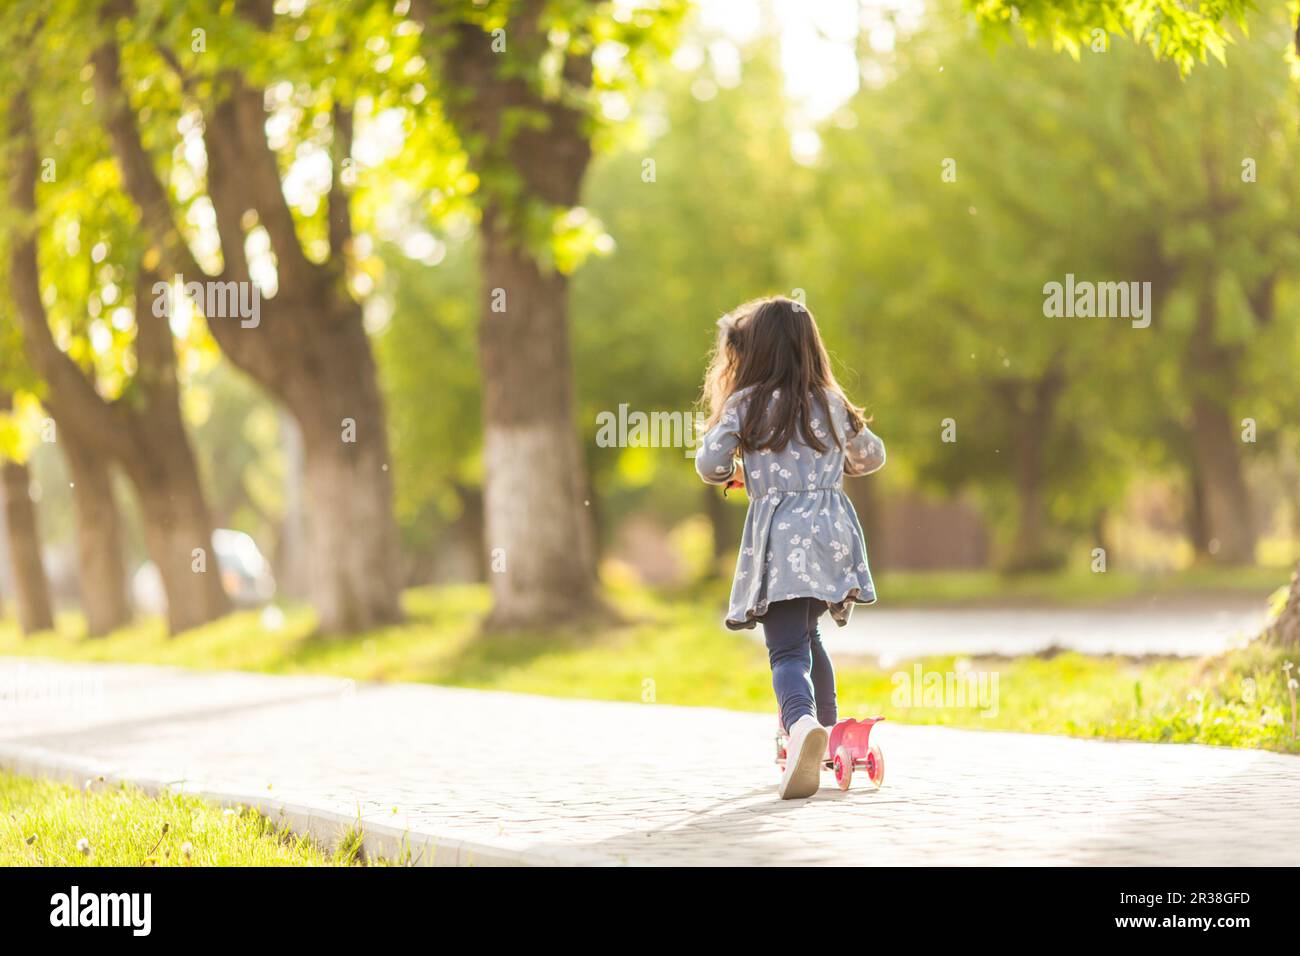 Girl resting actively Stock Photo